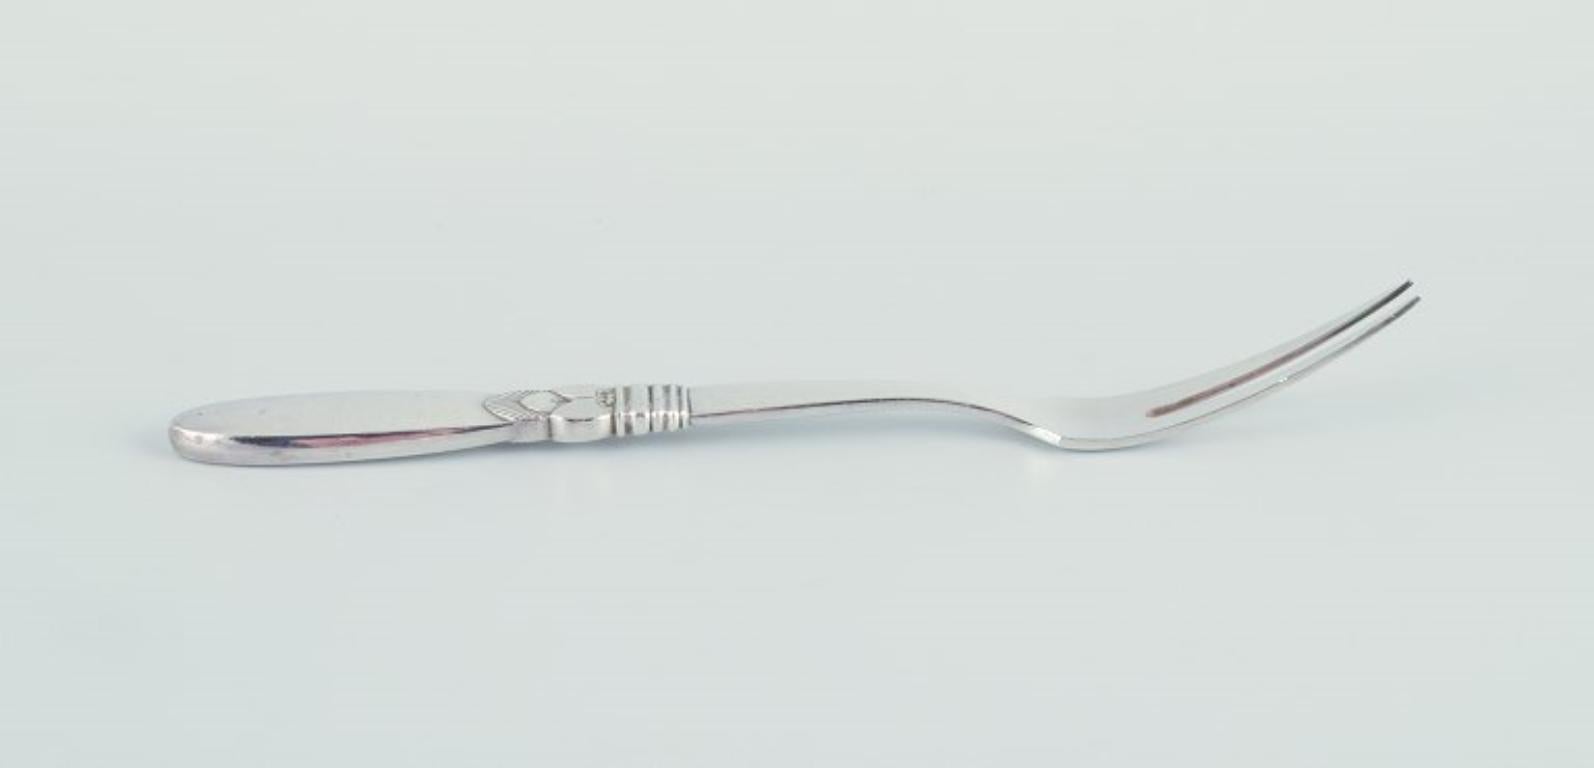 Georg Jensen Cactus. Long carving fork in all silver, sterling silver.
Hallmarked after 1944.
In perfect condition.
Dimensions: Length 23.0 cm.